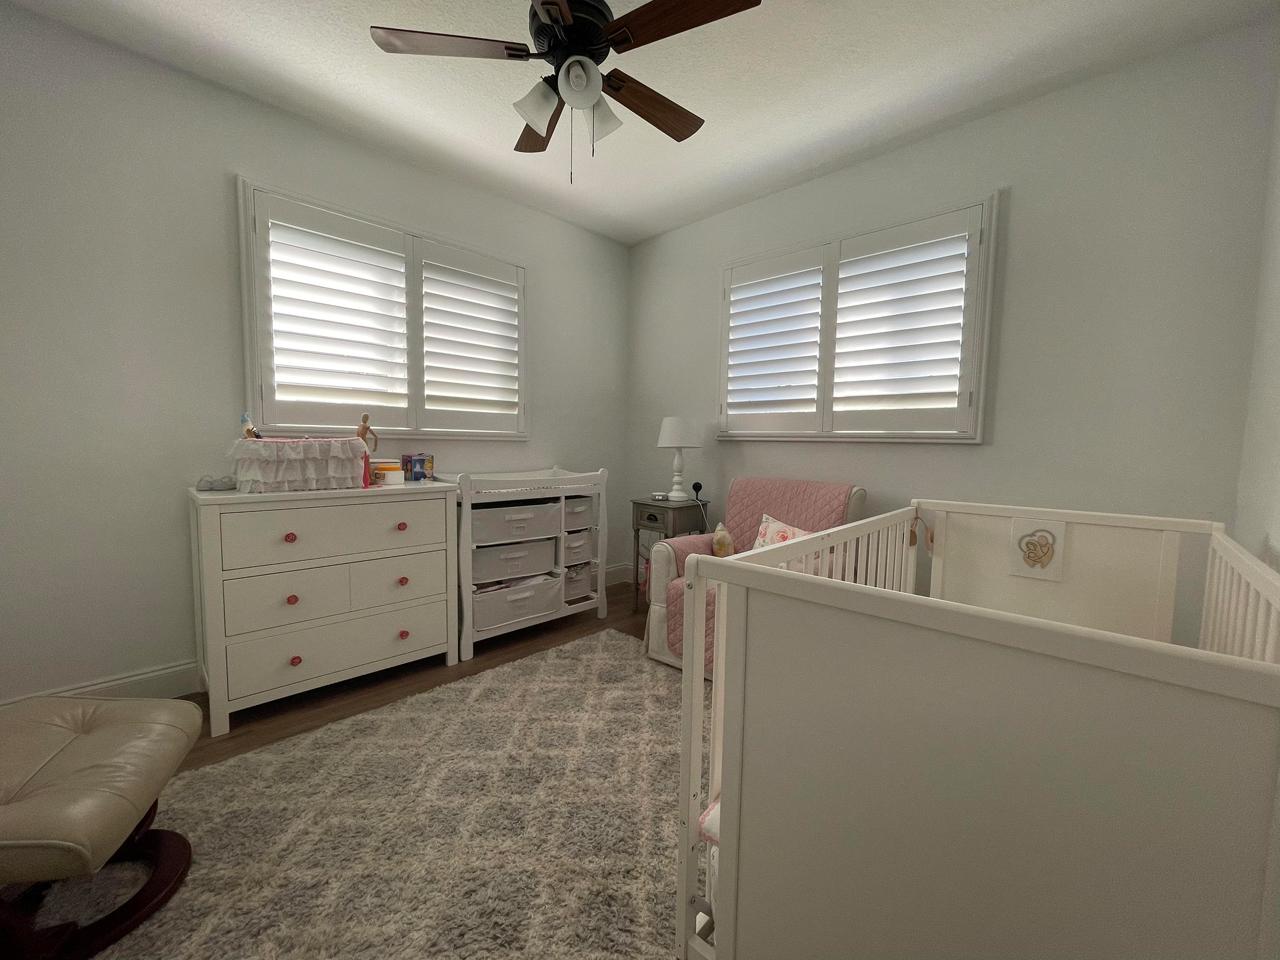 Baby's nursery with plantation shutters